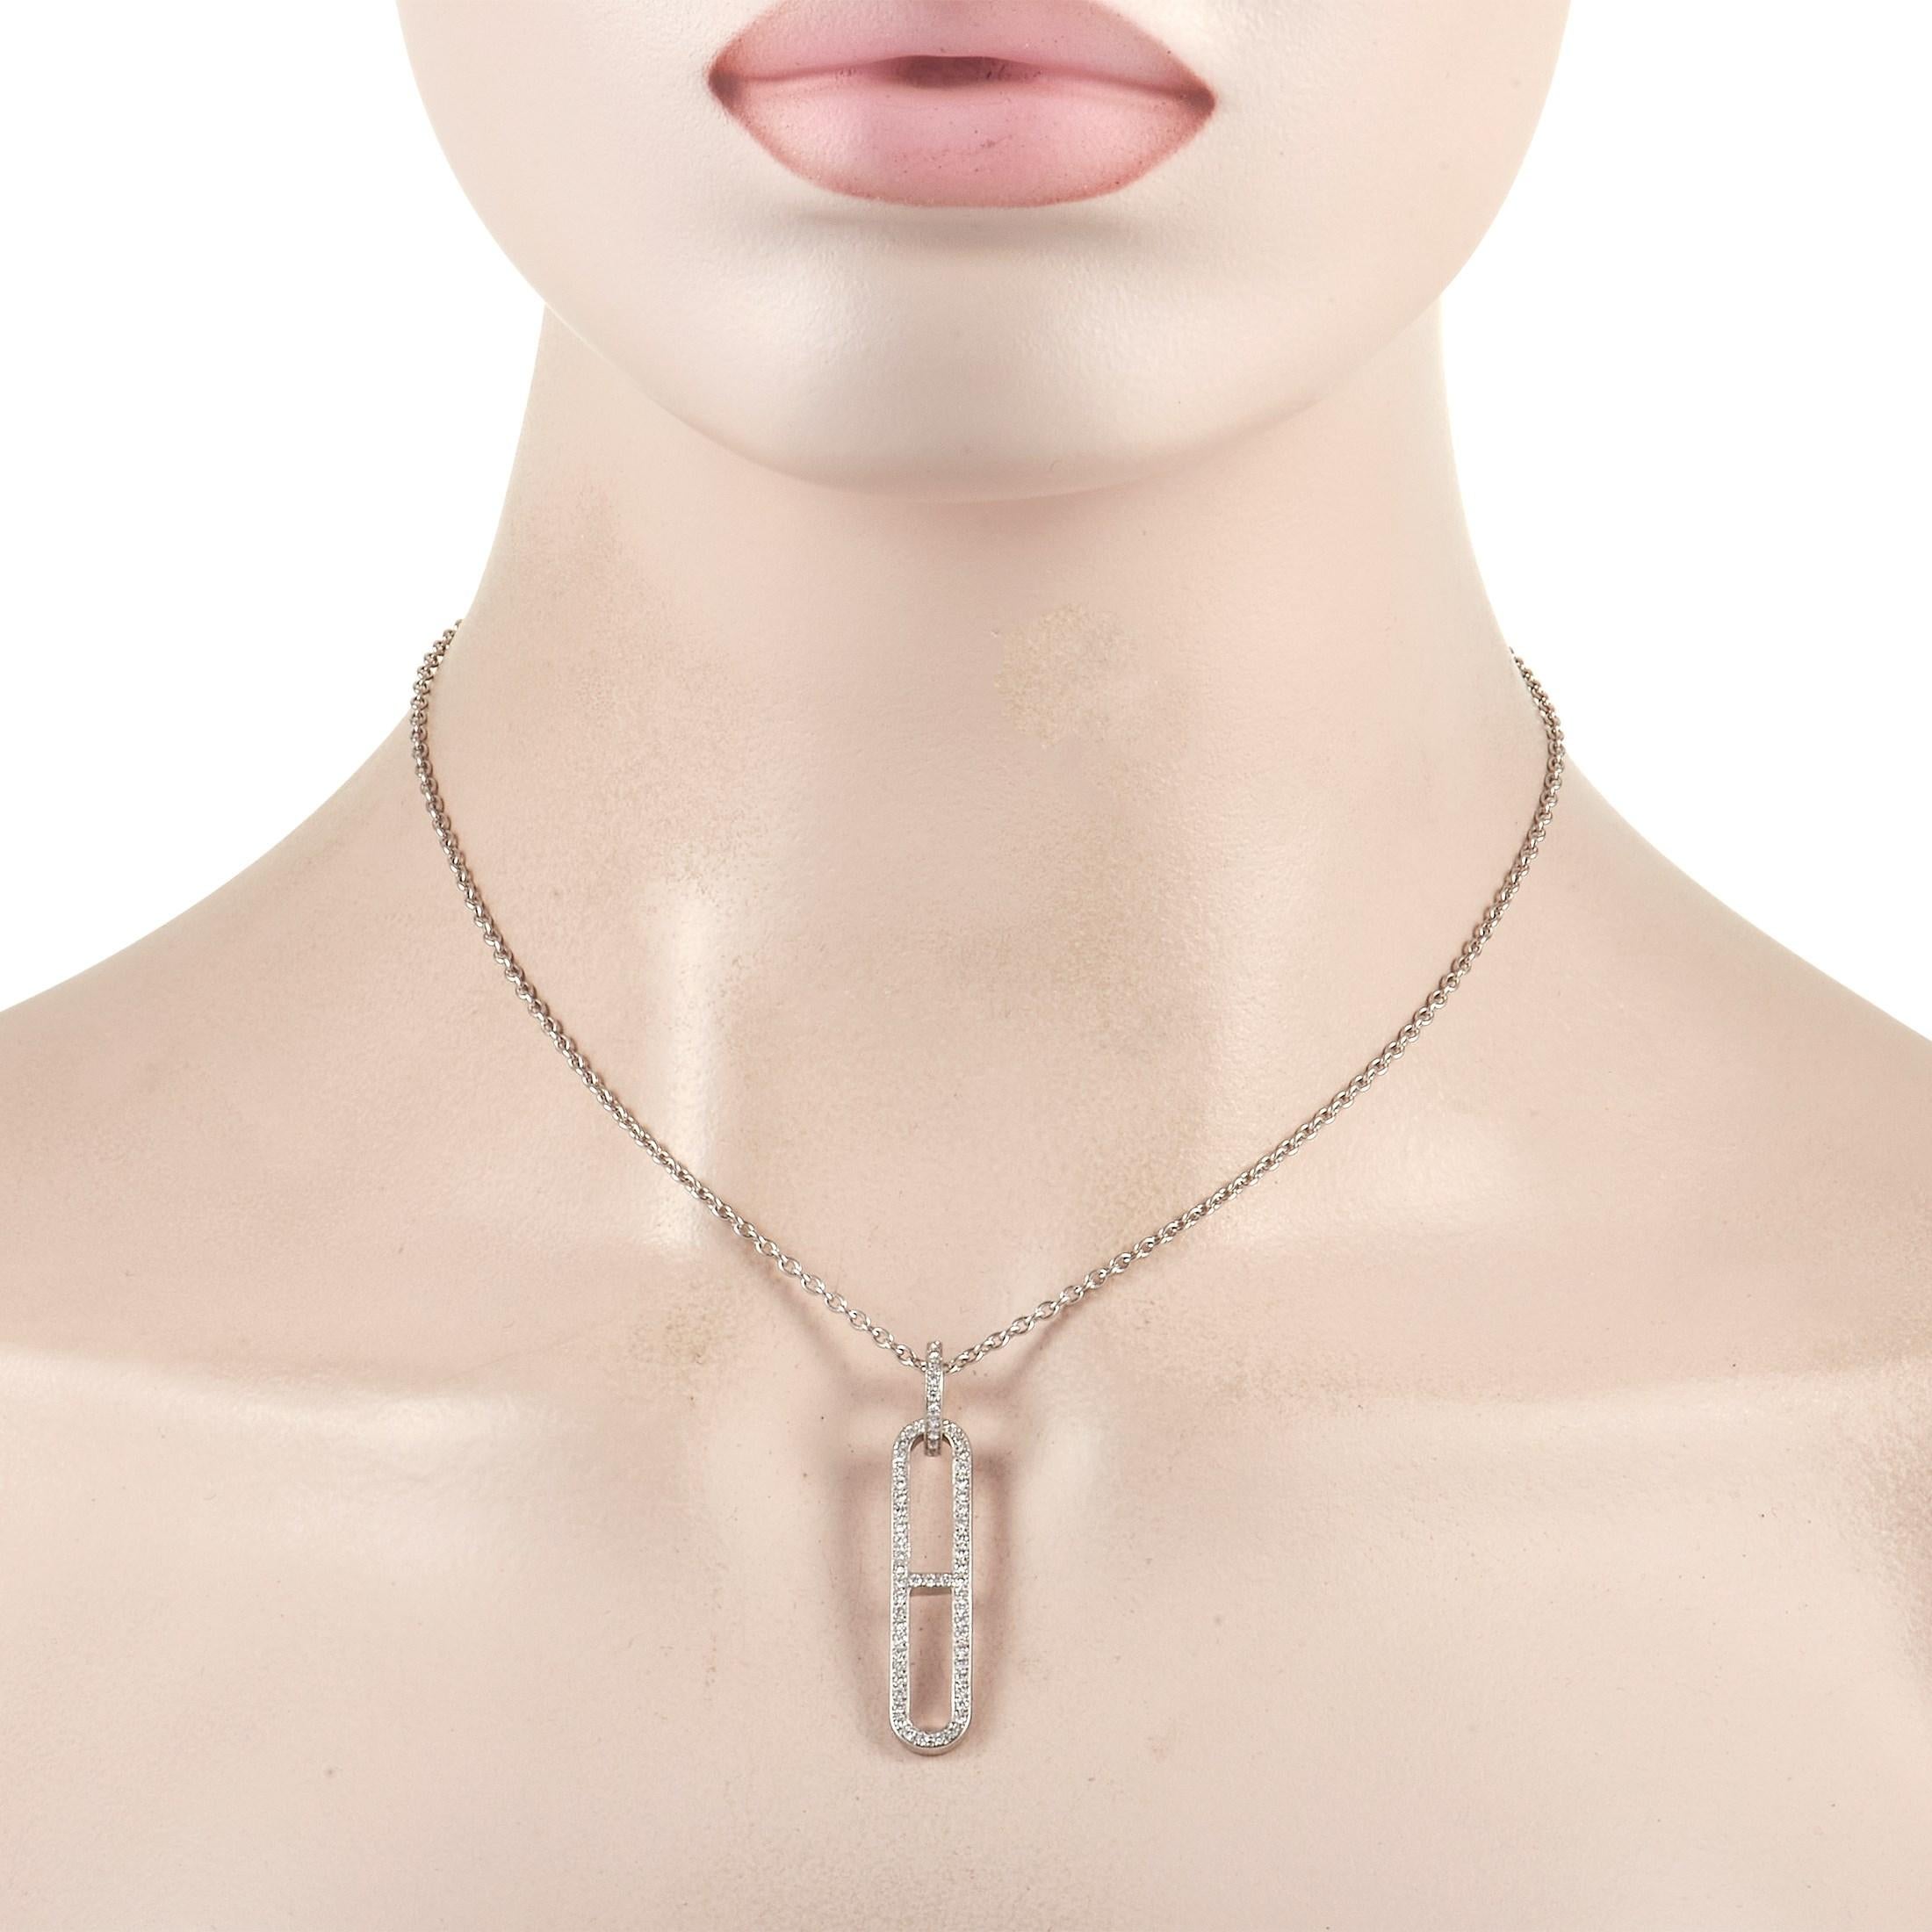 A sporty yet chic piece of fine jewelry from one of the world's most valuable fashion brands. This Hermès 18K White Gold Diamond Chaîne d'ancre Necklace featuers a 16-inch long chain bearing a diamond-set Chain D'Ancre motif pendant. The pendant